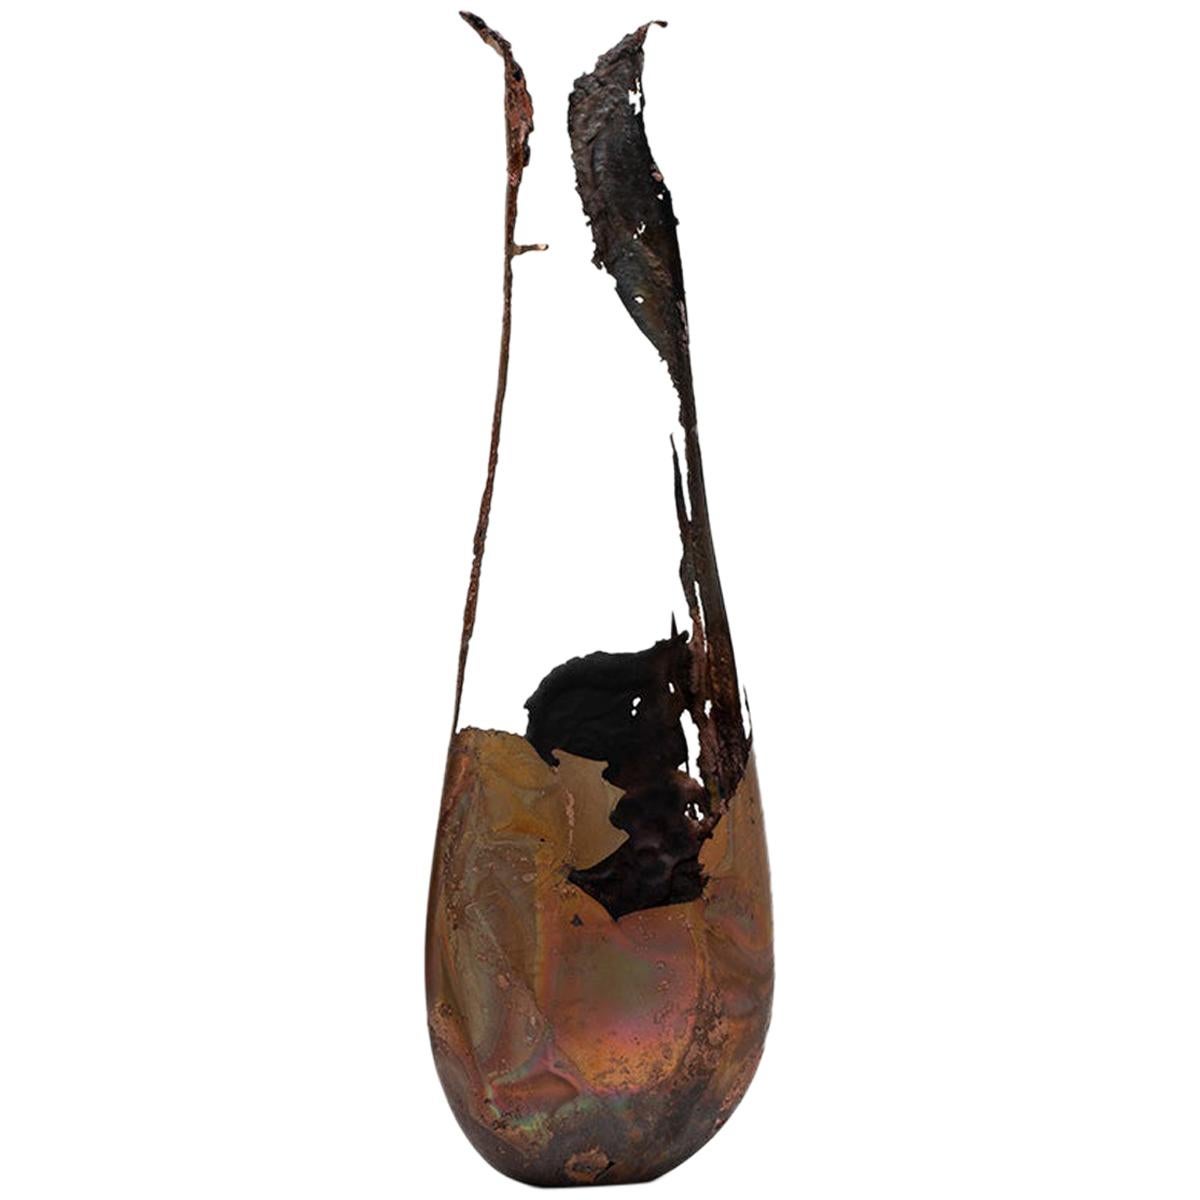 Omer Arbel 113 Series, Unique Vessel n05 in Copper Alloy Casted in Glass For Sale